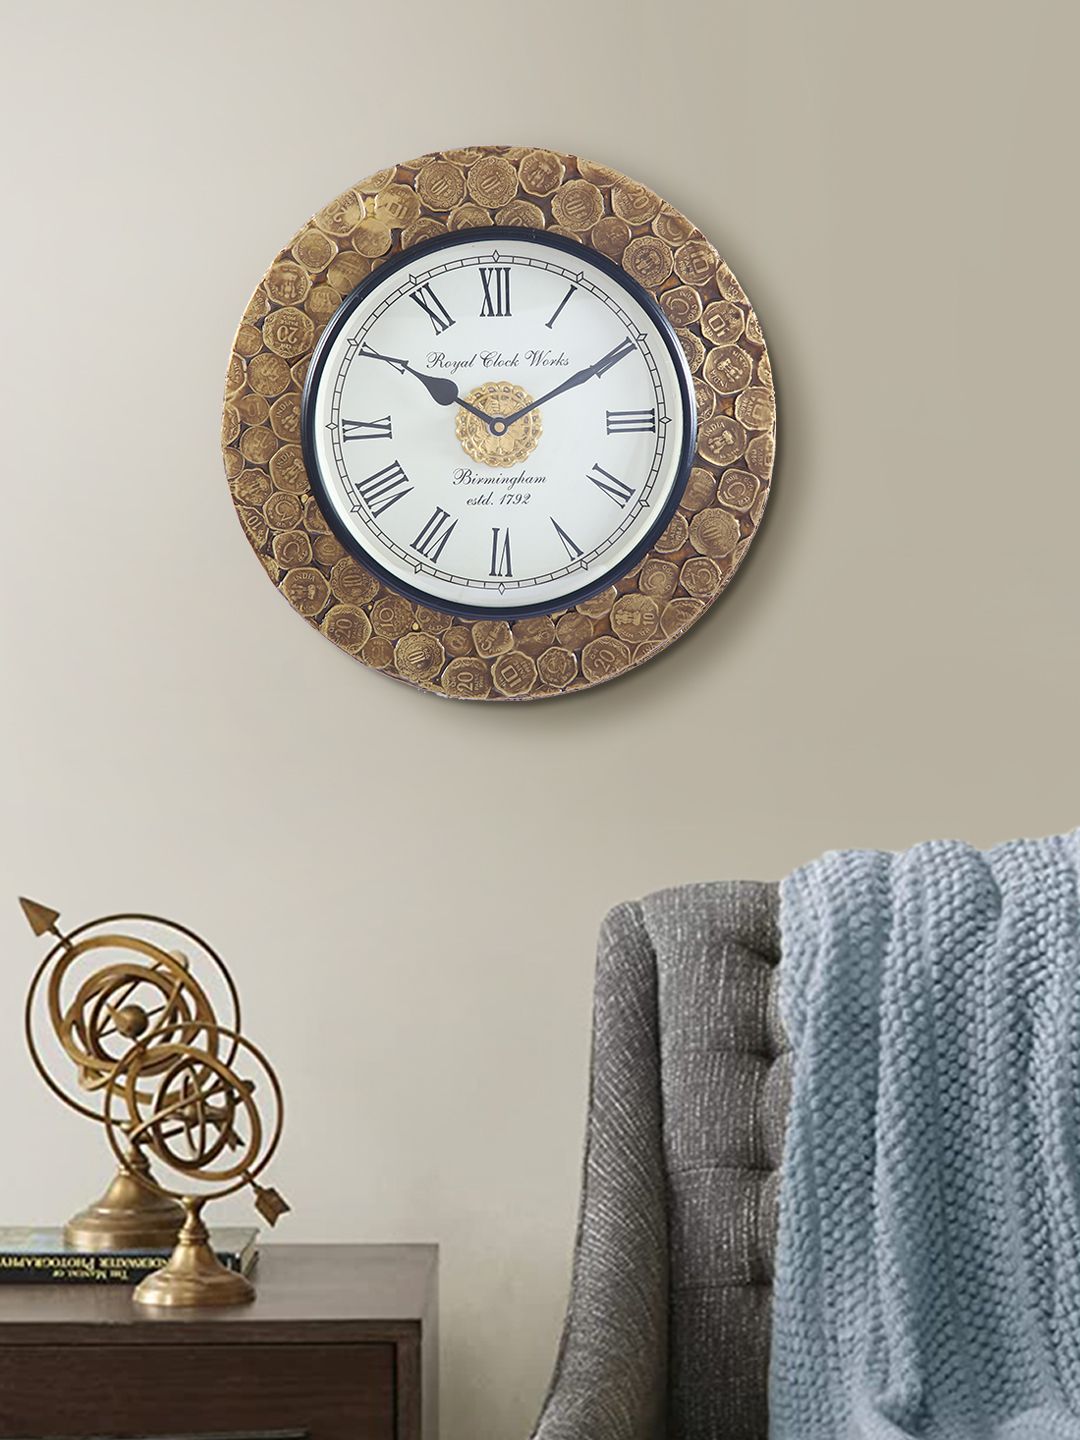 Aapno Rajasthan Gold-Toned Round Analogue Wall Clock Price in India